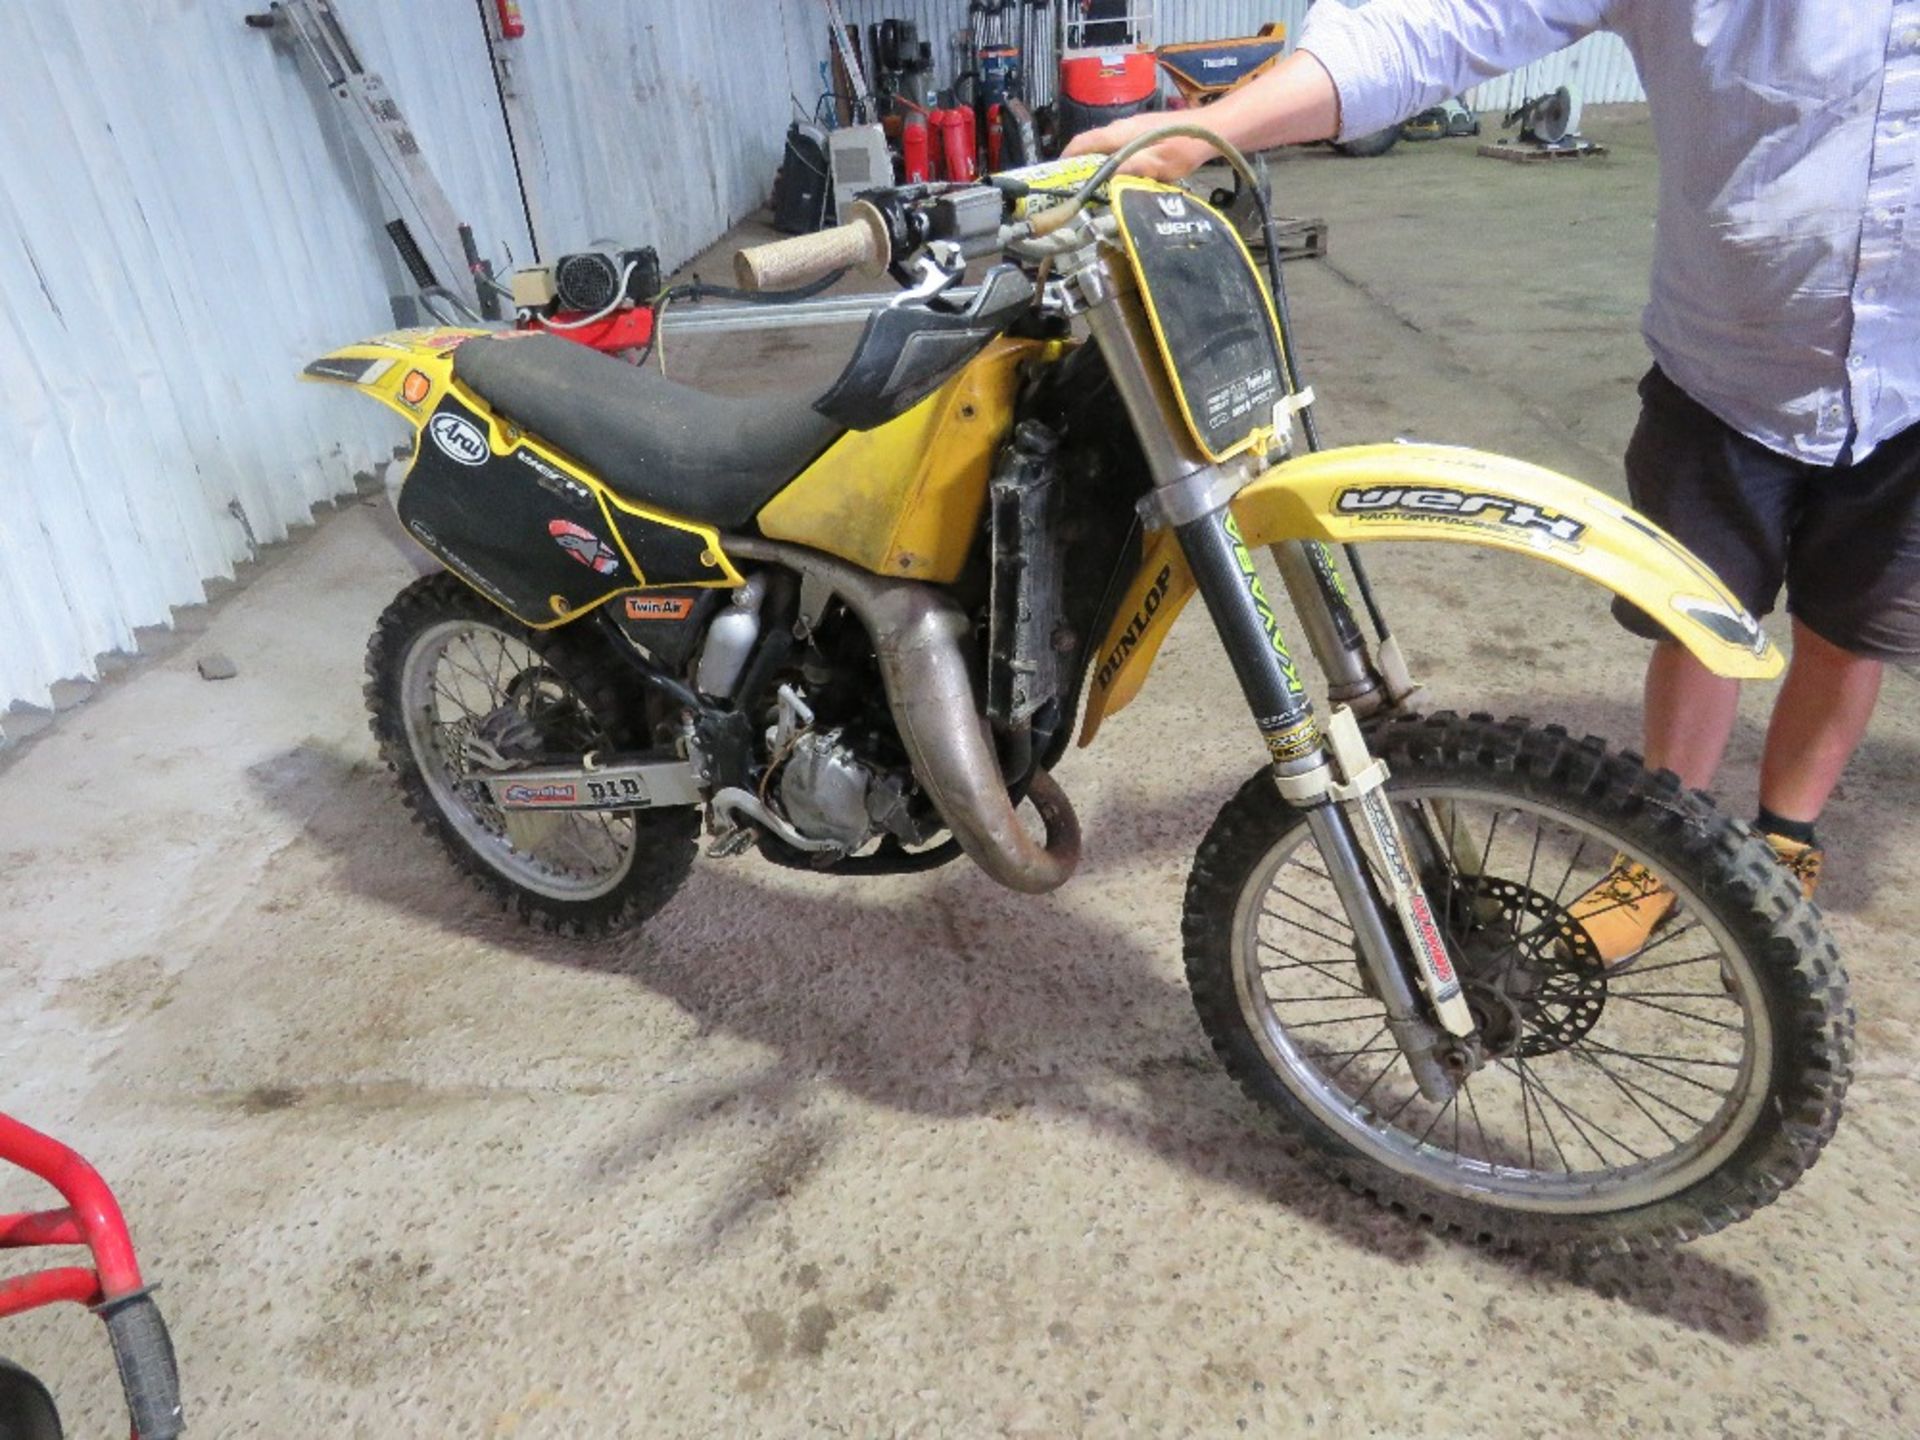 SUZUKI MOTOCROSS TRIALS MOTORBIKE. BEEN IN STORAGE AND UNUSED FOR OVER 5 YEARS. THIS LOT I